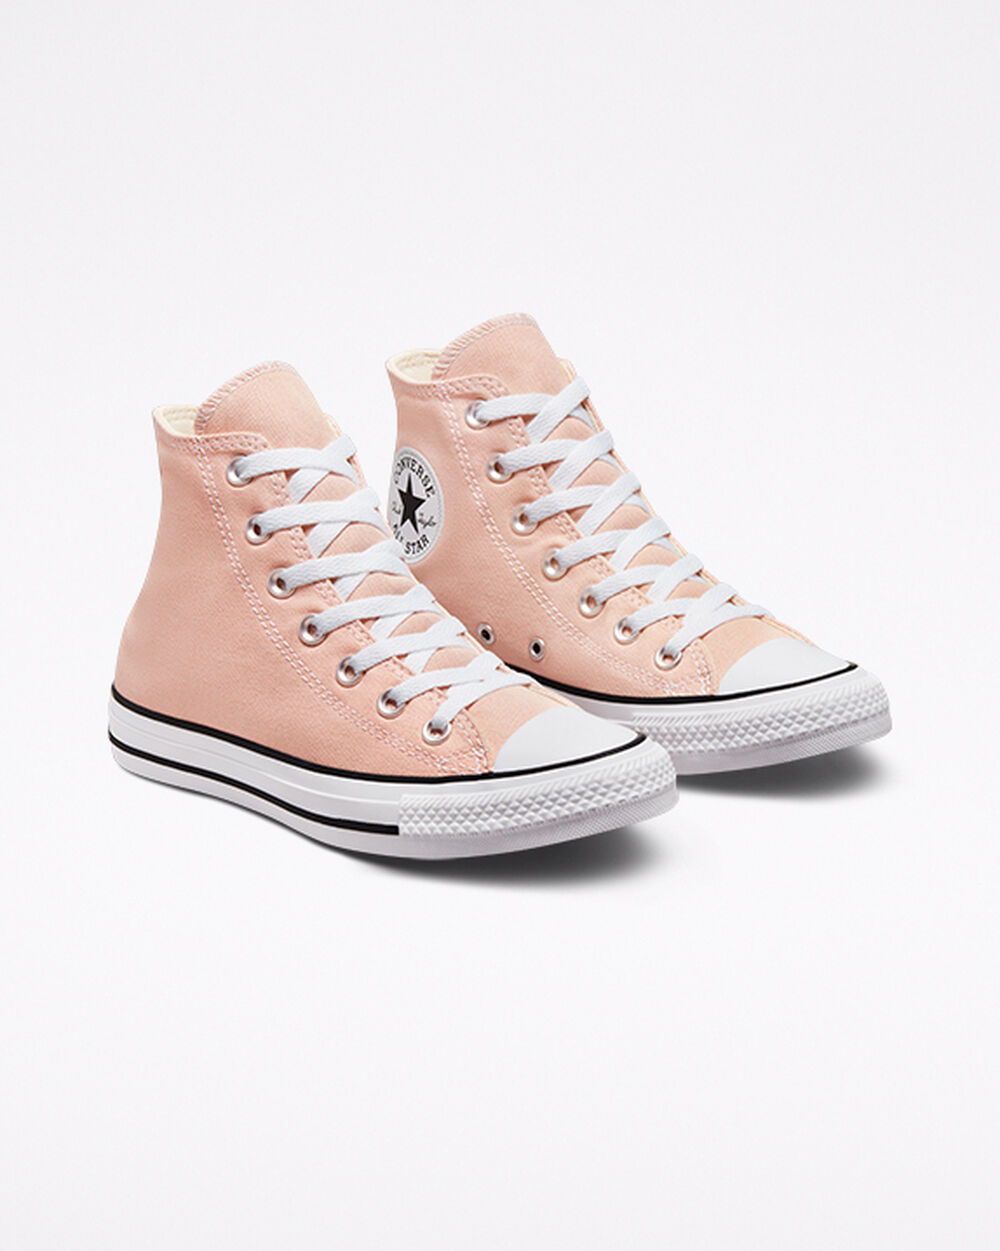 Tenis Converse Chuck Taylor All Star Mujer Rosas | Mexico-261066